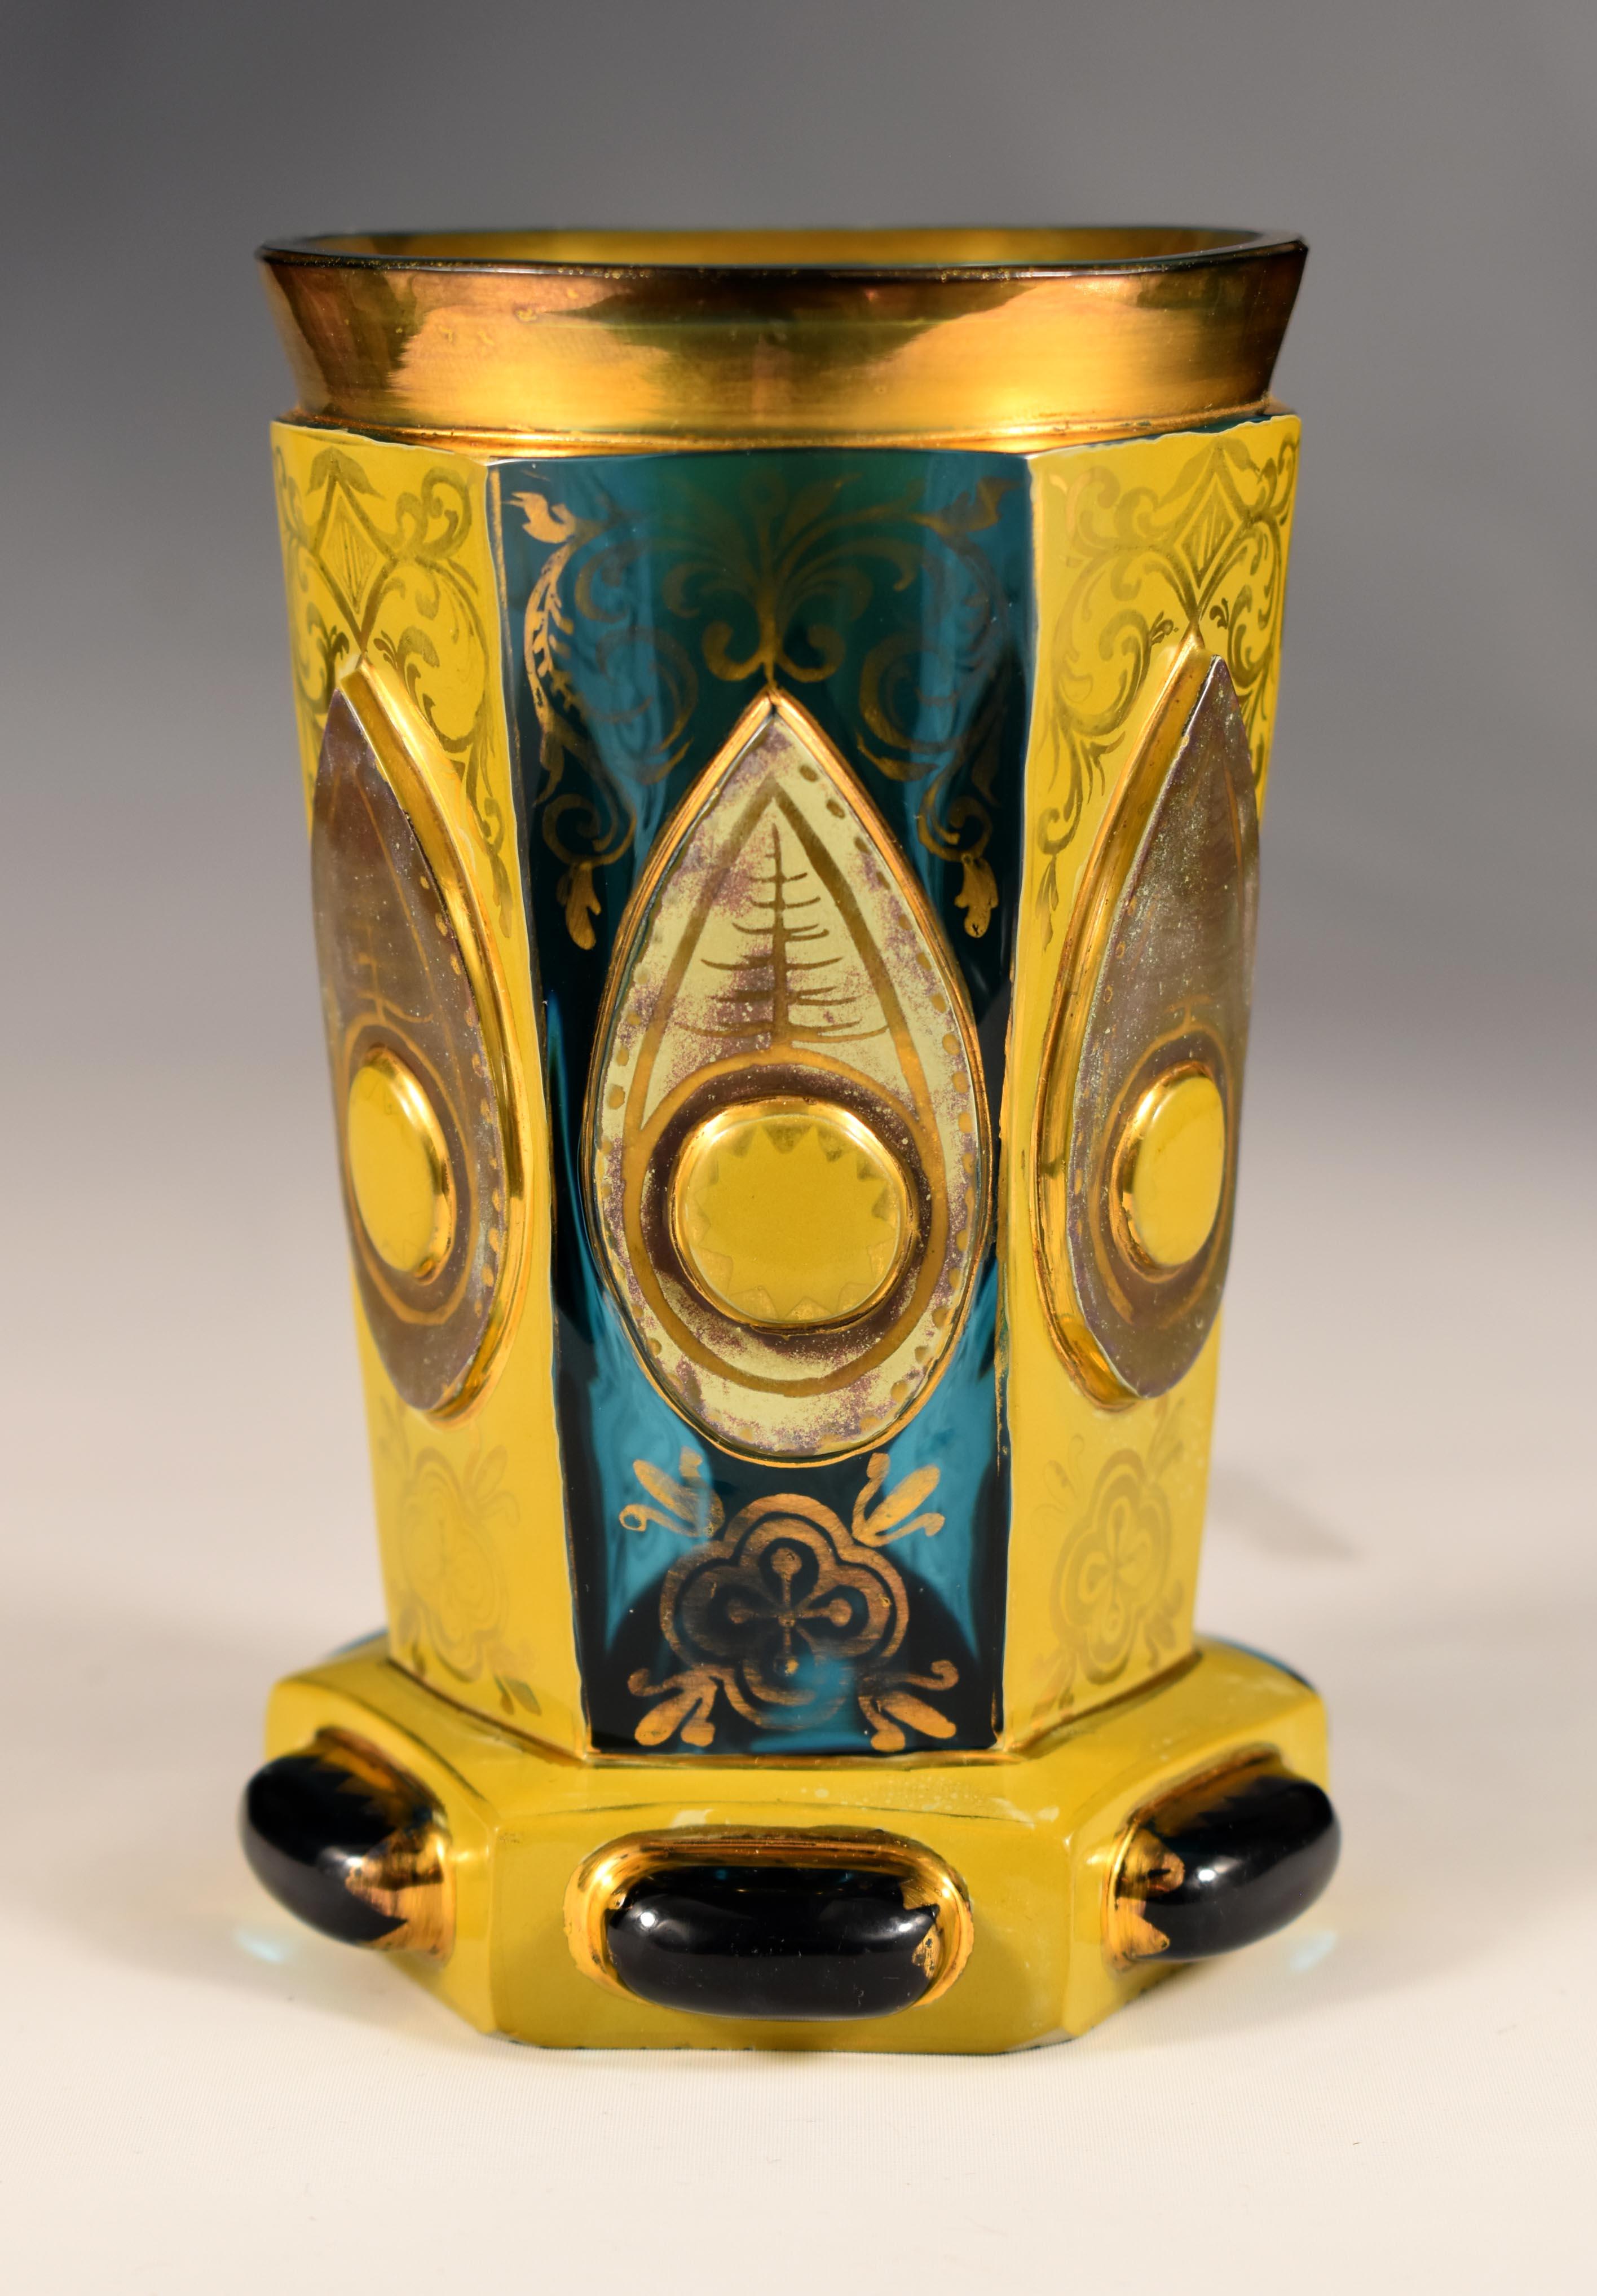 Cut lithyane glass goblet , painted with gold is typical for the F. Egermann 19th century Bohemian glass production in the Nothern Czech Republic. This is a beautiful presentation of Czech glassmakers’ mastery. This piece of art is very rare and